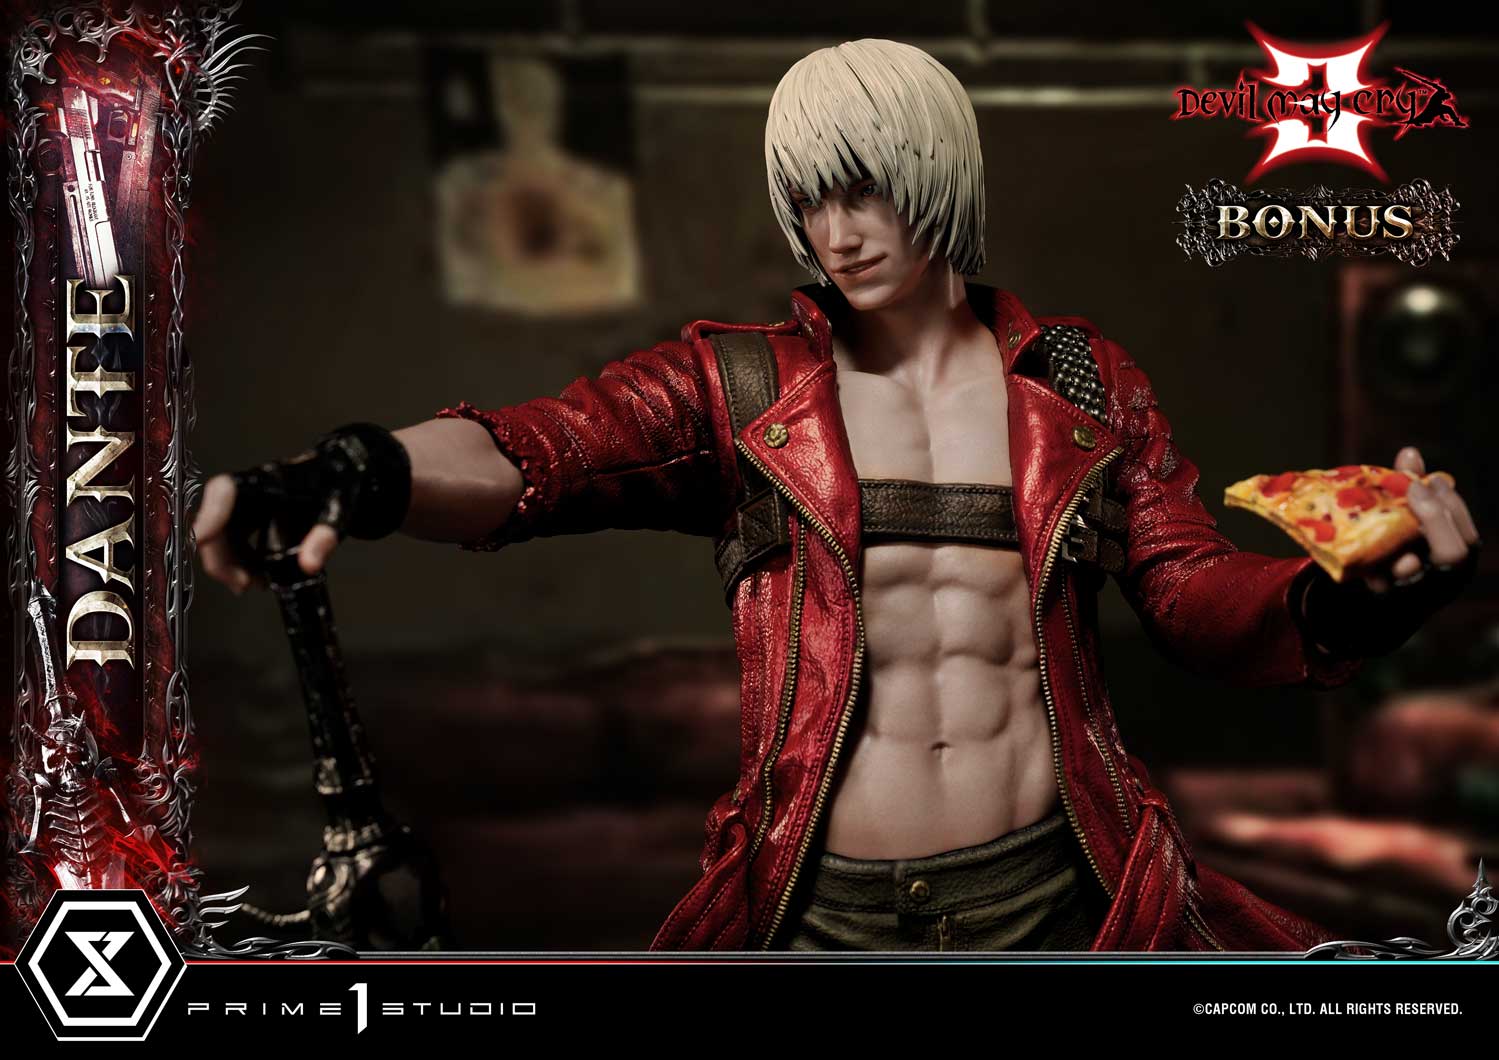 DmC Devil May Cry™ Avatar Dante 3 PS3 — buy online and track price